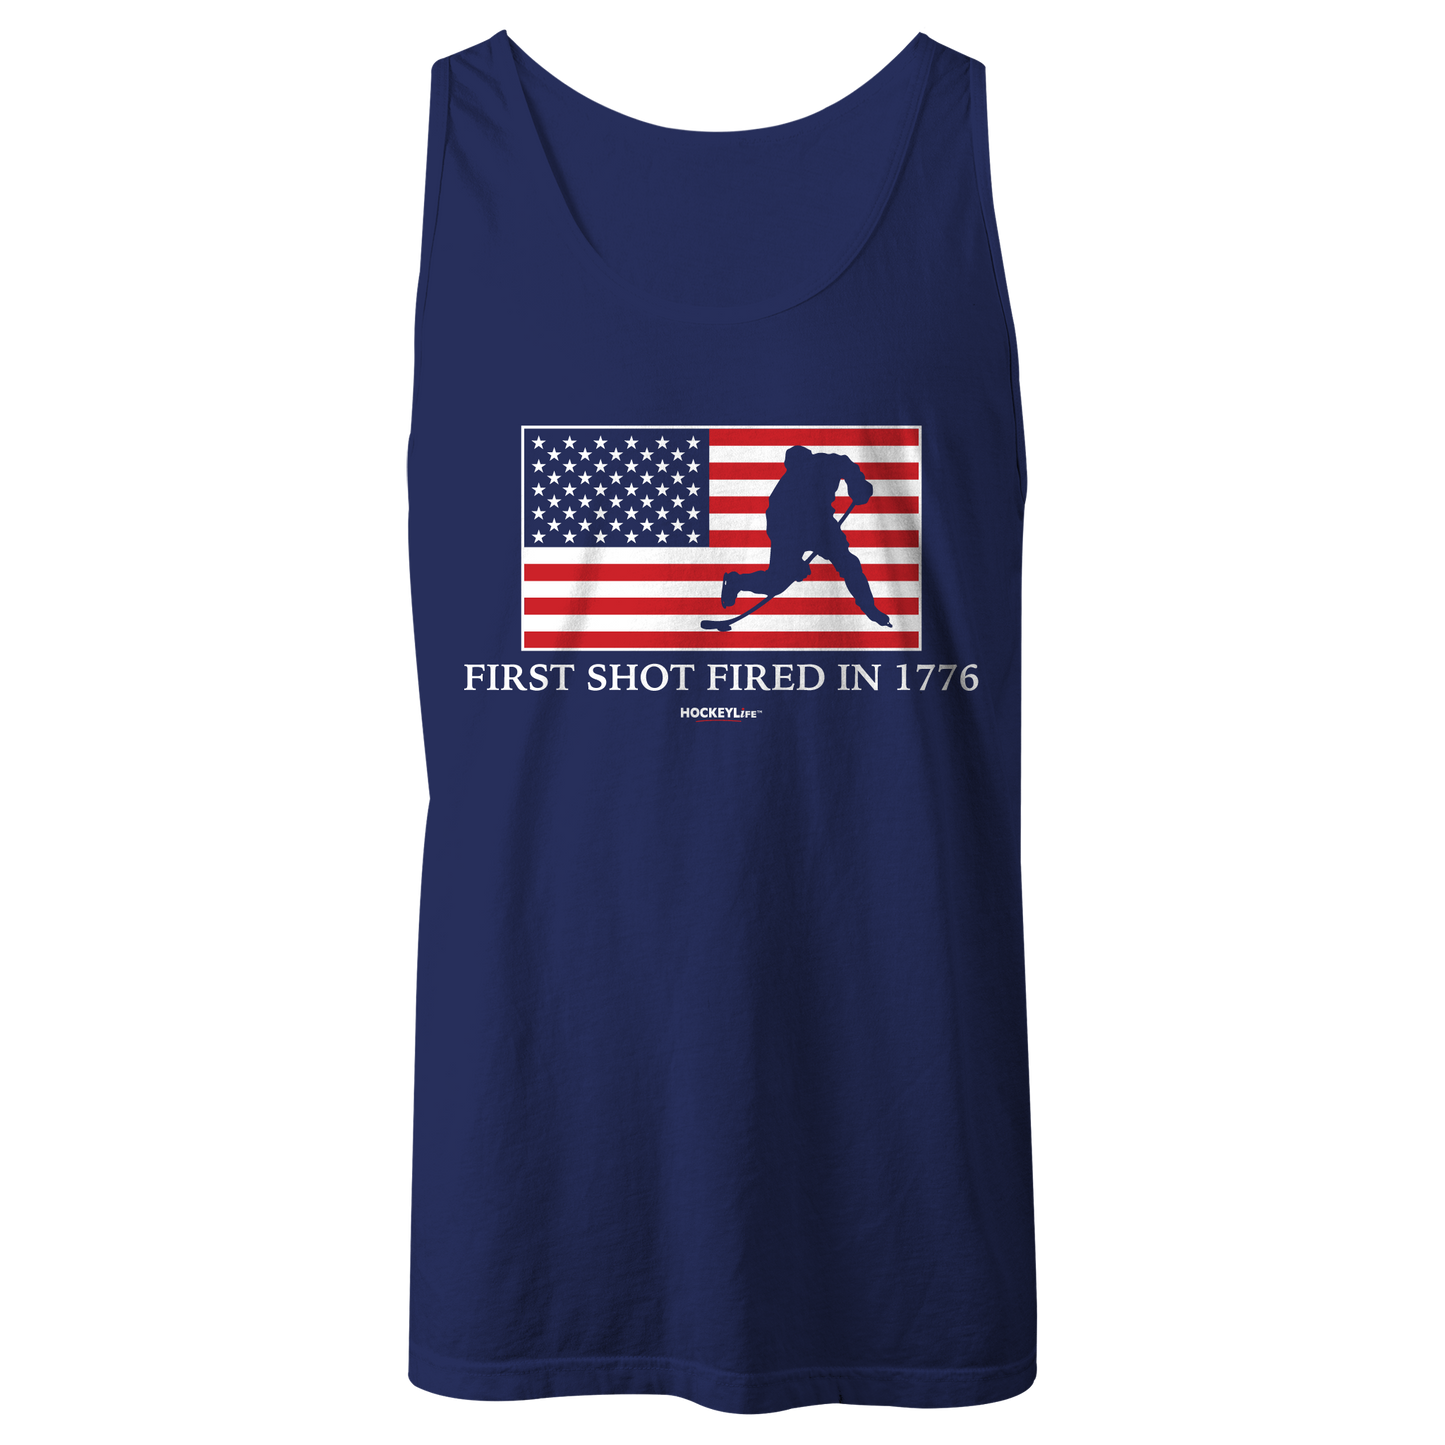 First Shot Fired in 1776 Tank Top (Navy)